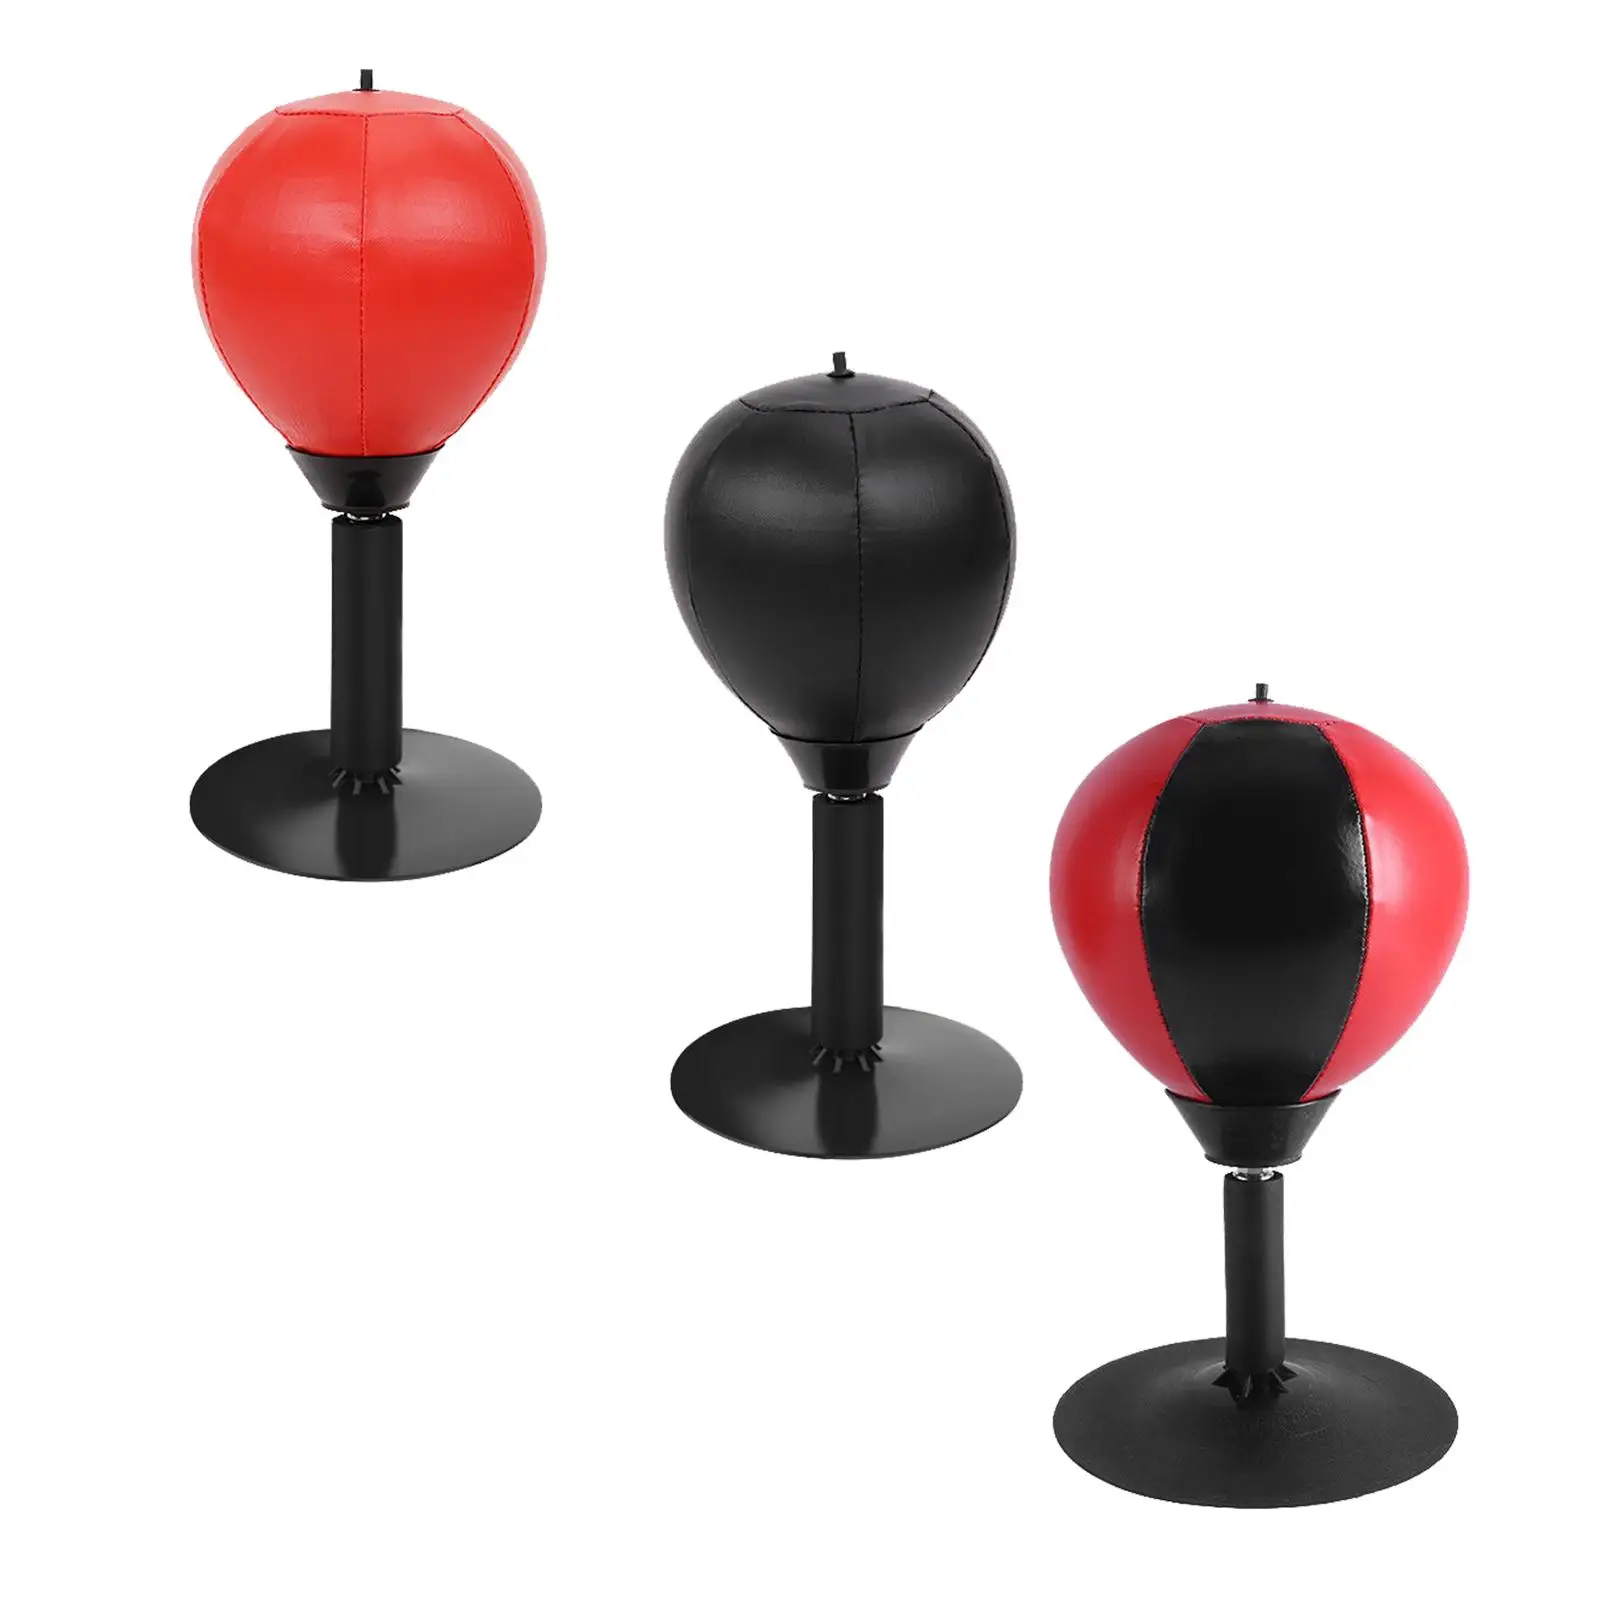 PU Punching Bag Decompression Toys Desktop Boxing Ball for Fitness Equipment